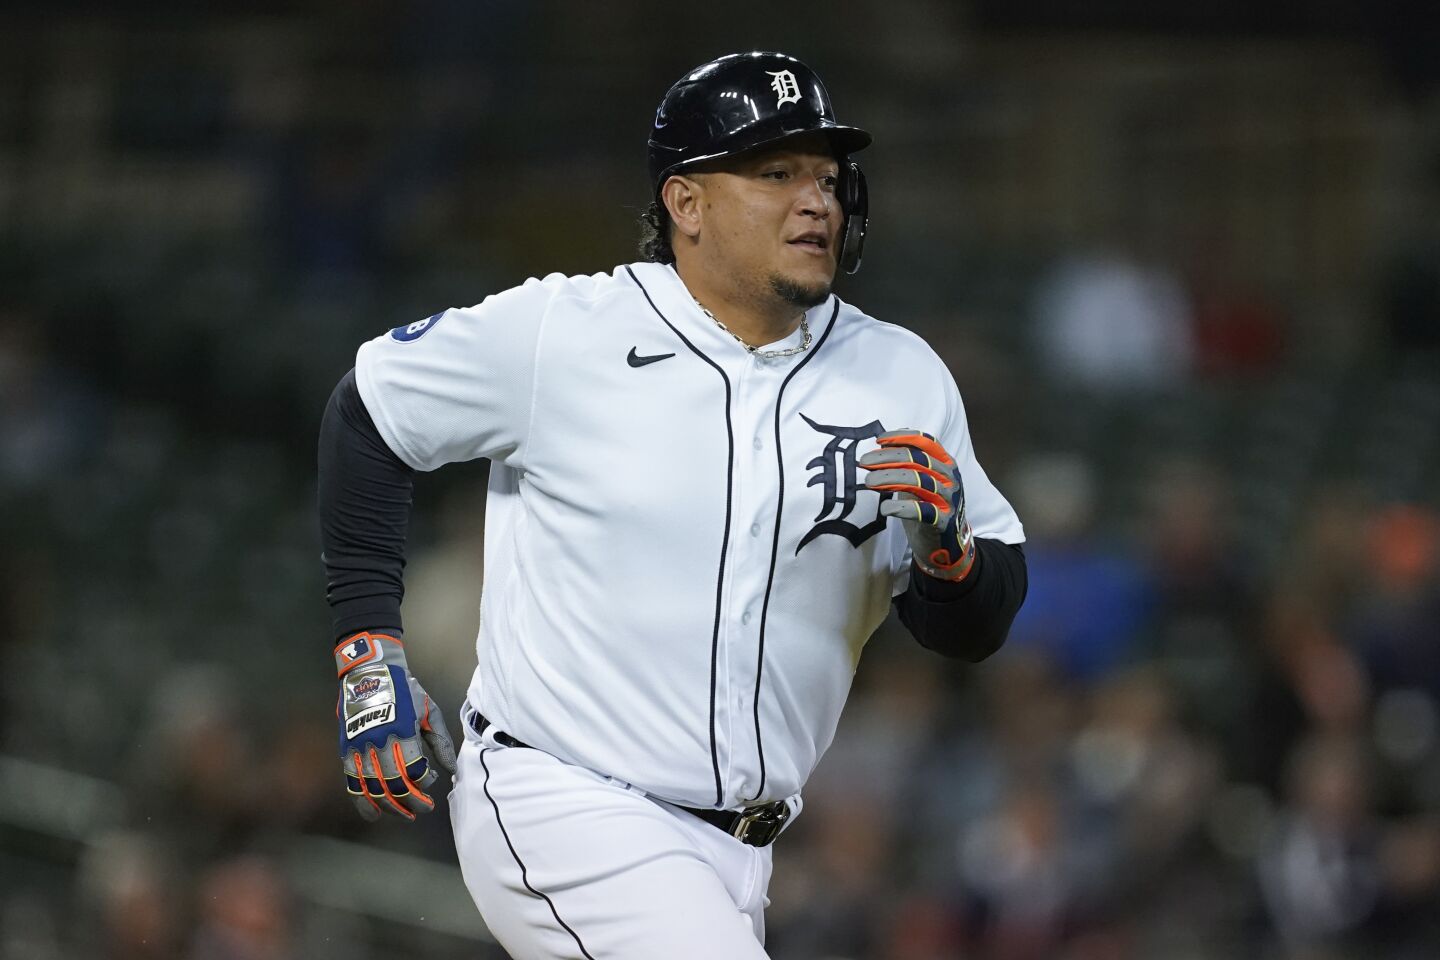 25 | Detroit Tigers (64-95; LW: 26)Miguel Cabrera played his 1000th game on Sunday at Comerica Park and the expectation is that the 39-year-old will be back in 2023 (because why in the world would he give up $32 million in the final year of his contract?)